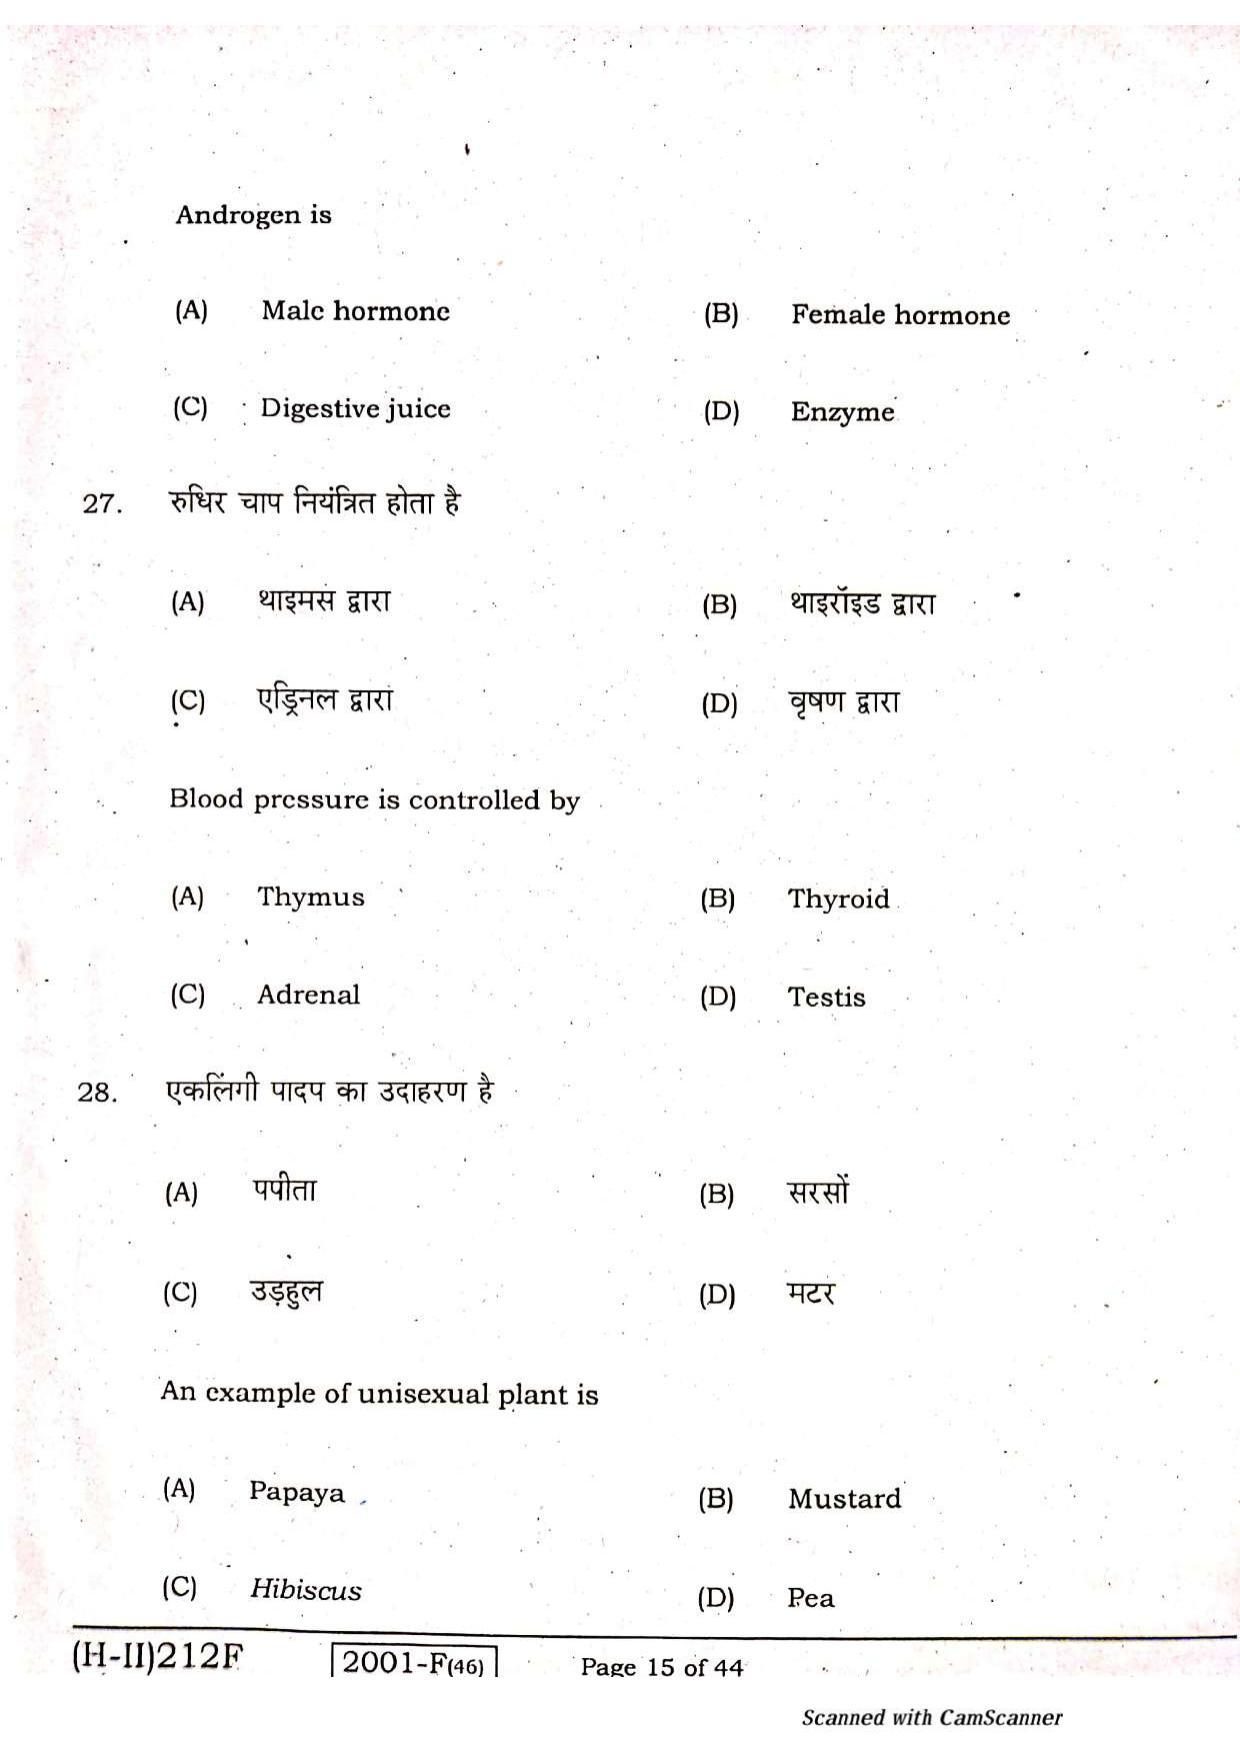 Bihar Board Class 10 Science 2021 (2nd Sitting) Question Paper - Page 13